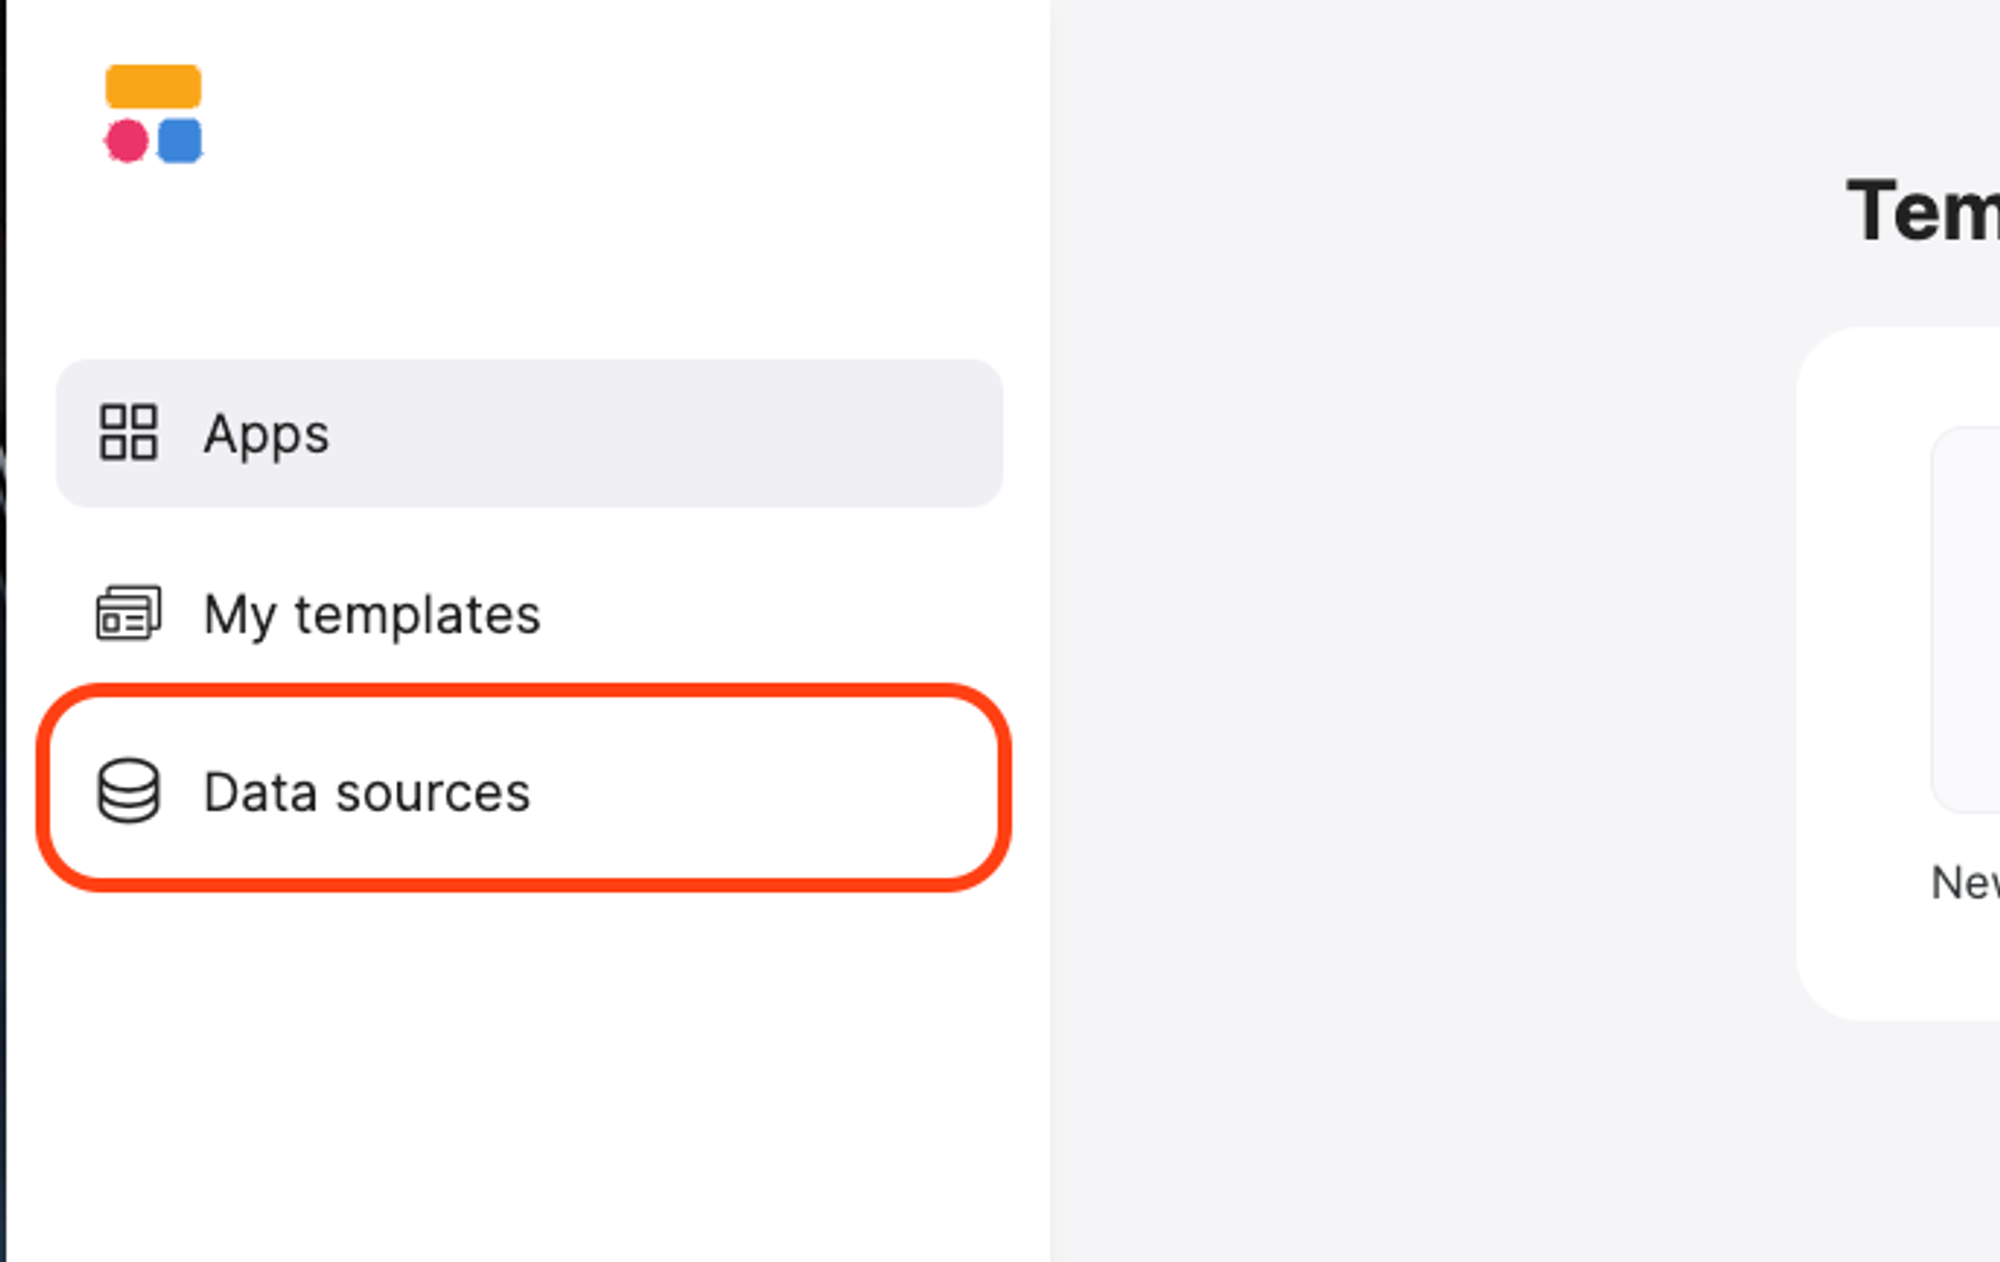 Click on the data sources tab